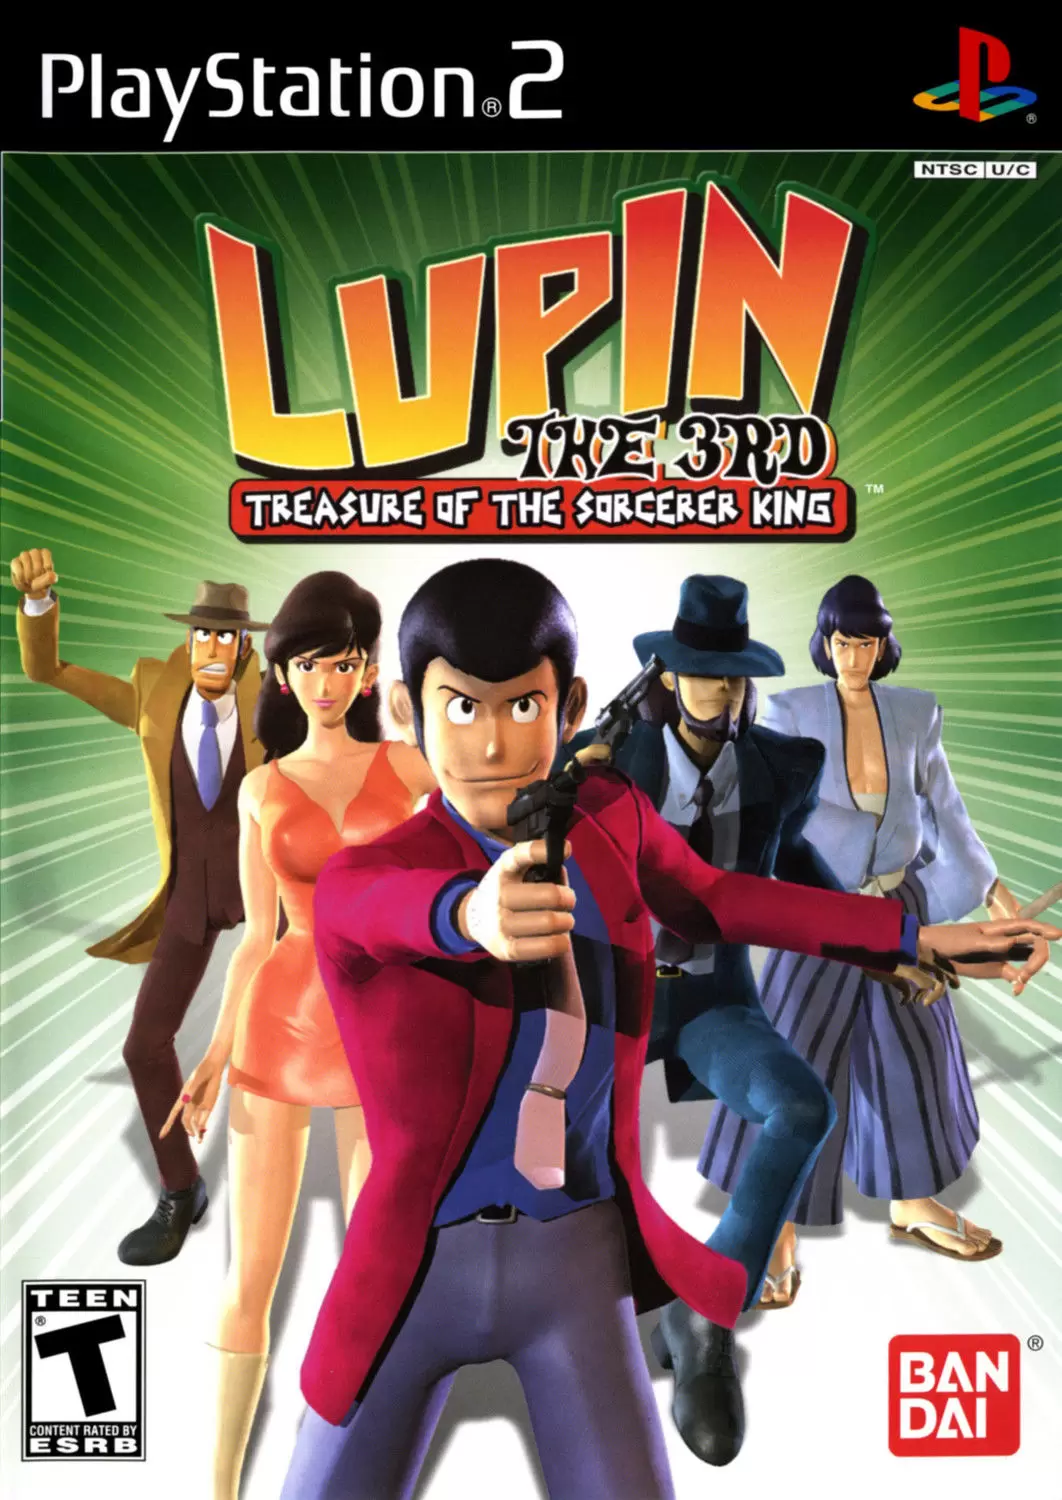 PS2 Games - Lupin the 3rd: Treasure of the Sorcerer King